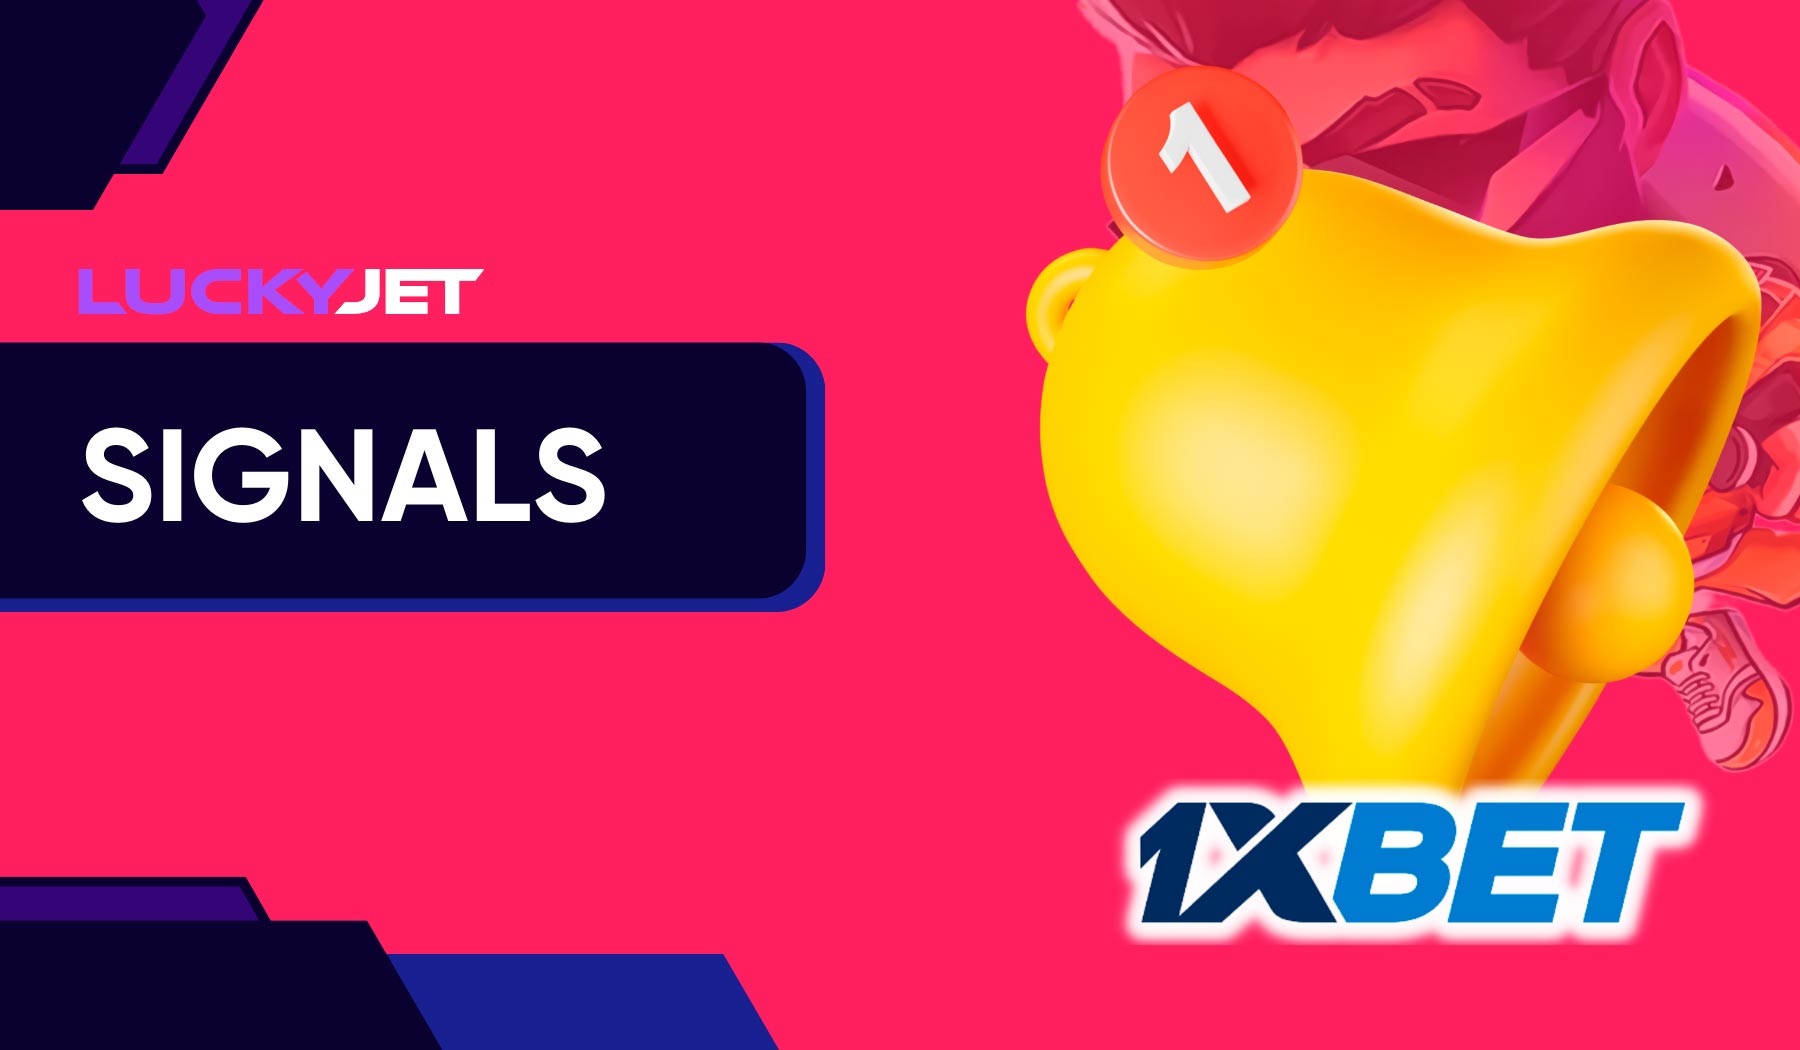 The Lucky Jet game in 1xbet attracts players with its characteristic signals